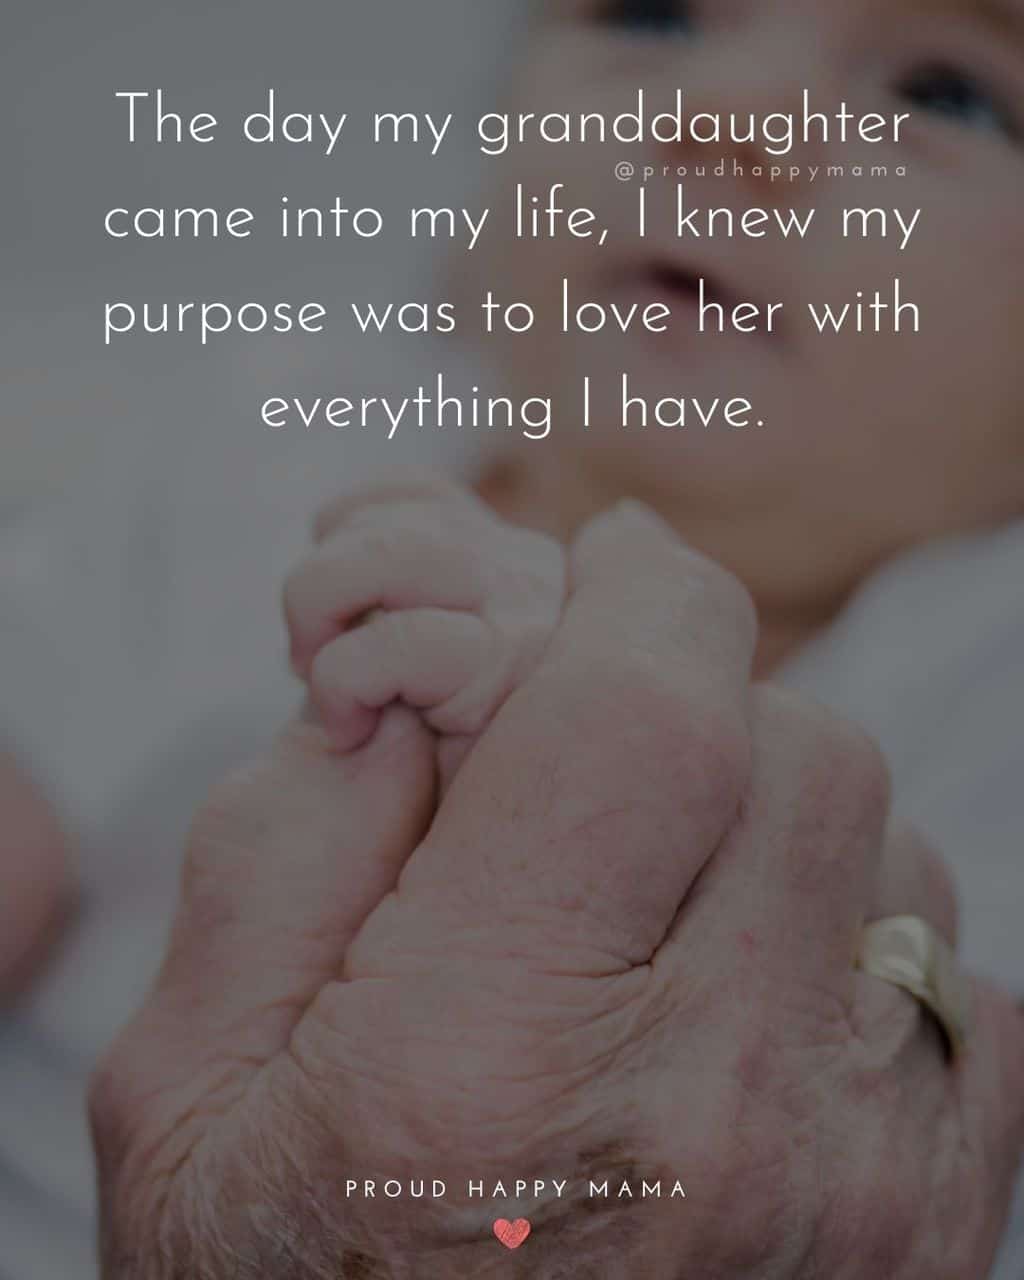 Granddaughter Quotes - The day my granddaughter came into my life, I knew my purpose was to love her with everything I have.